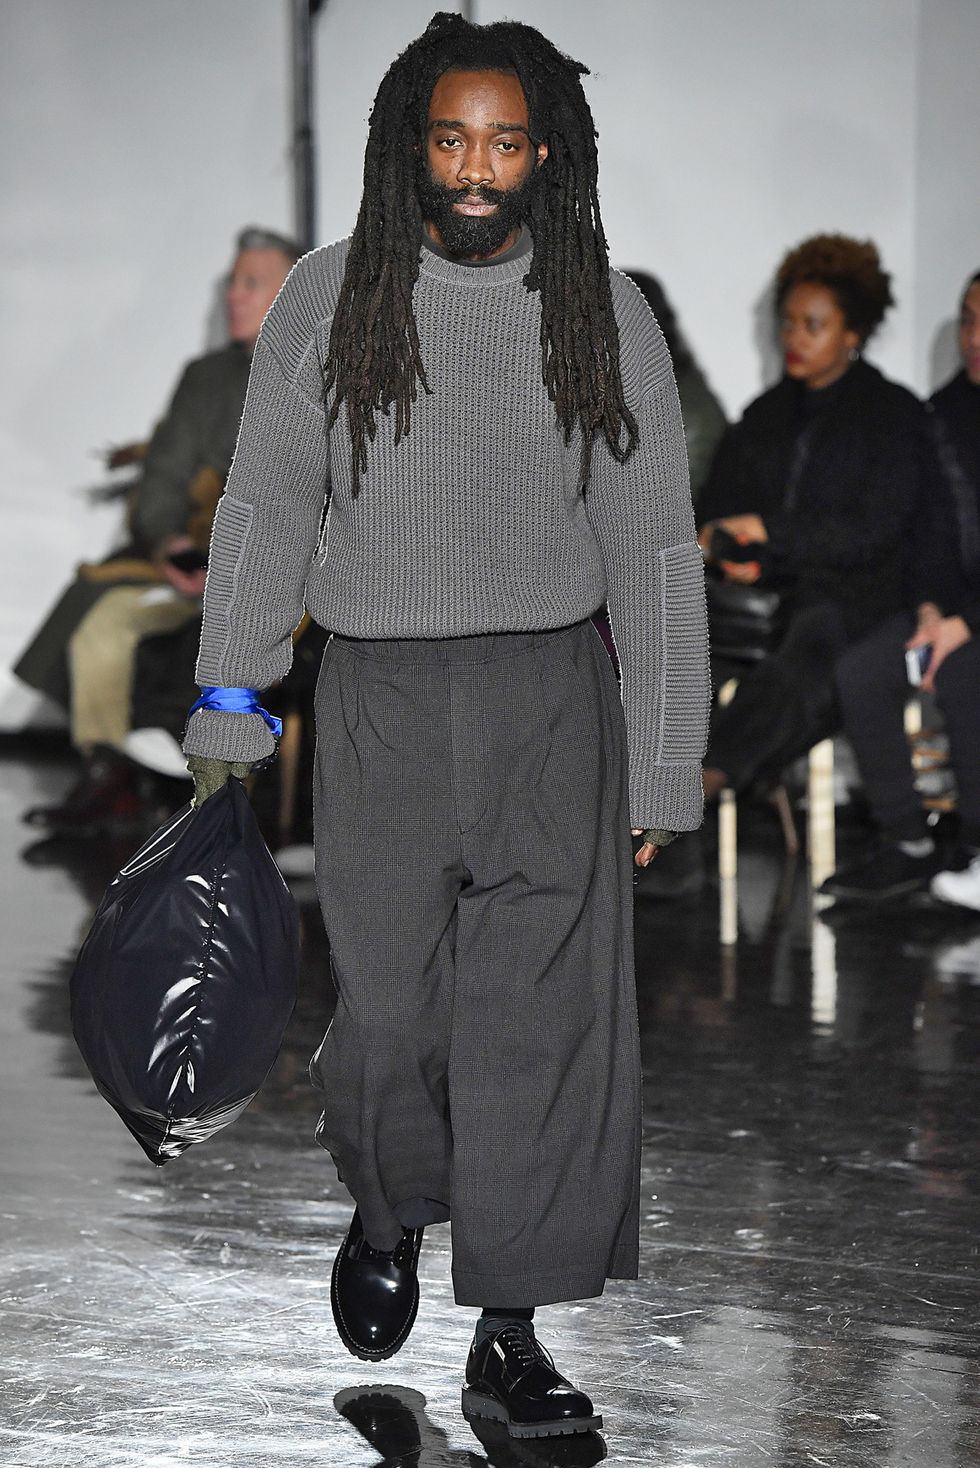 This Fashion Show Inspired by the Homeless Is Seriously F*cked Up